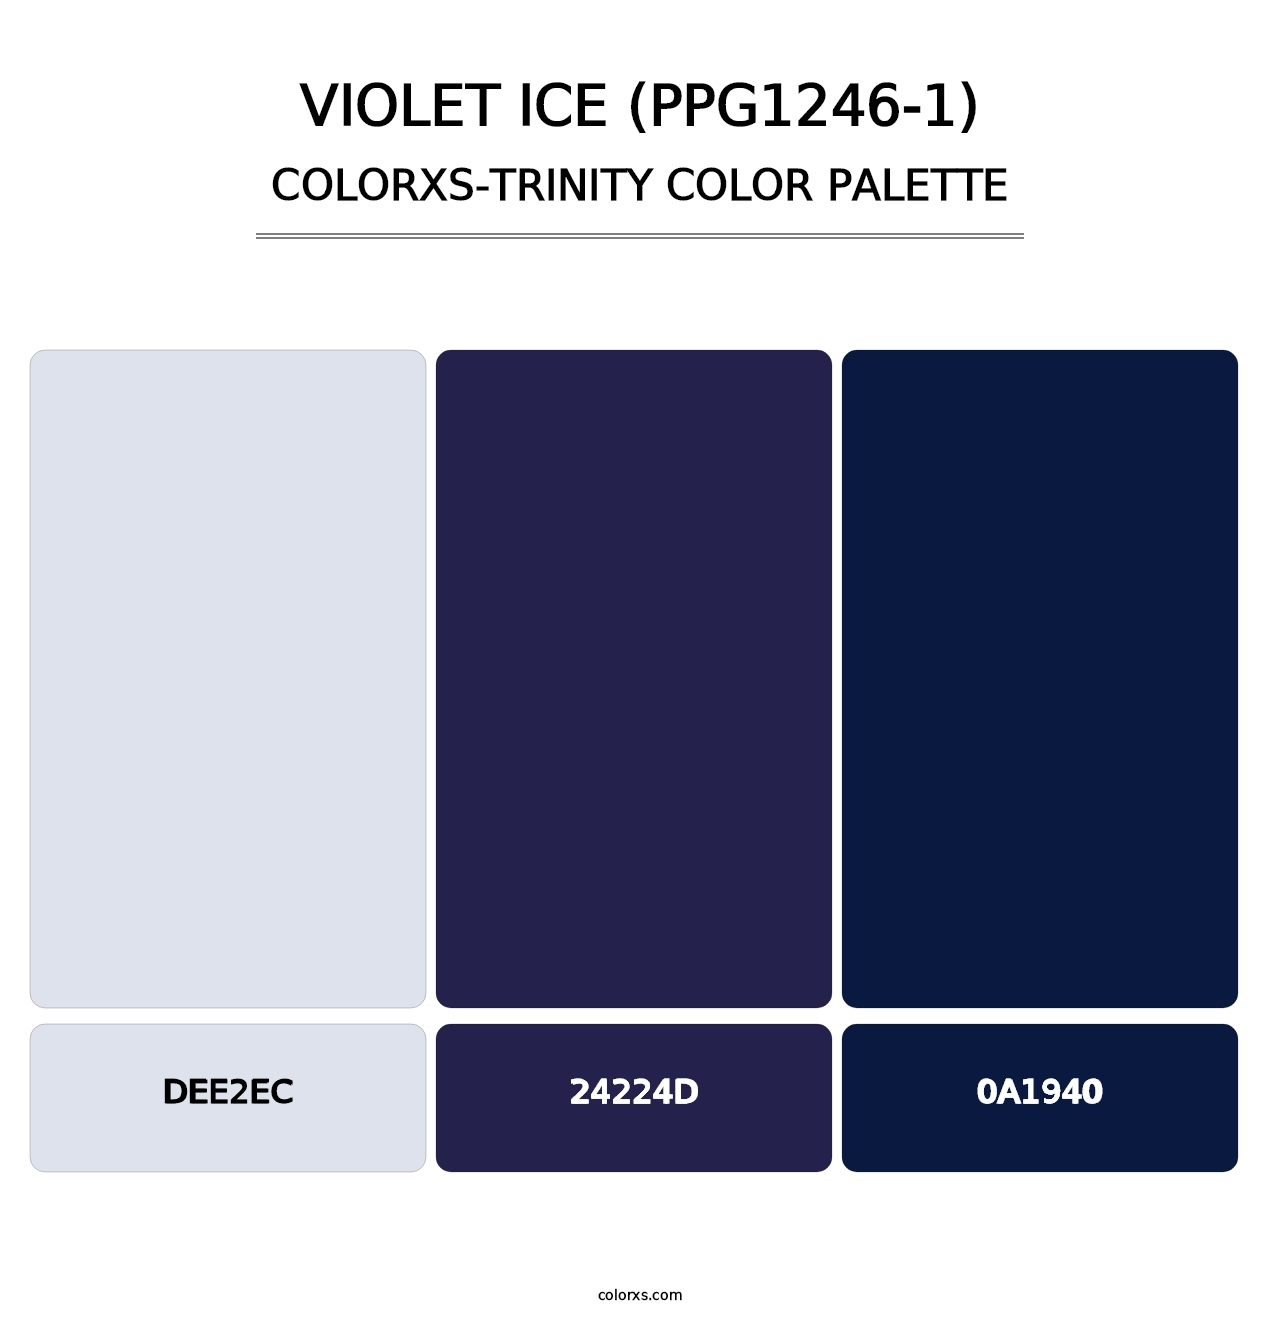 Violet Ice (PPG1246-1) - Colorxs Trinity Palette